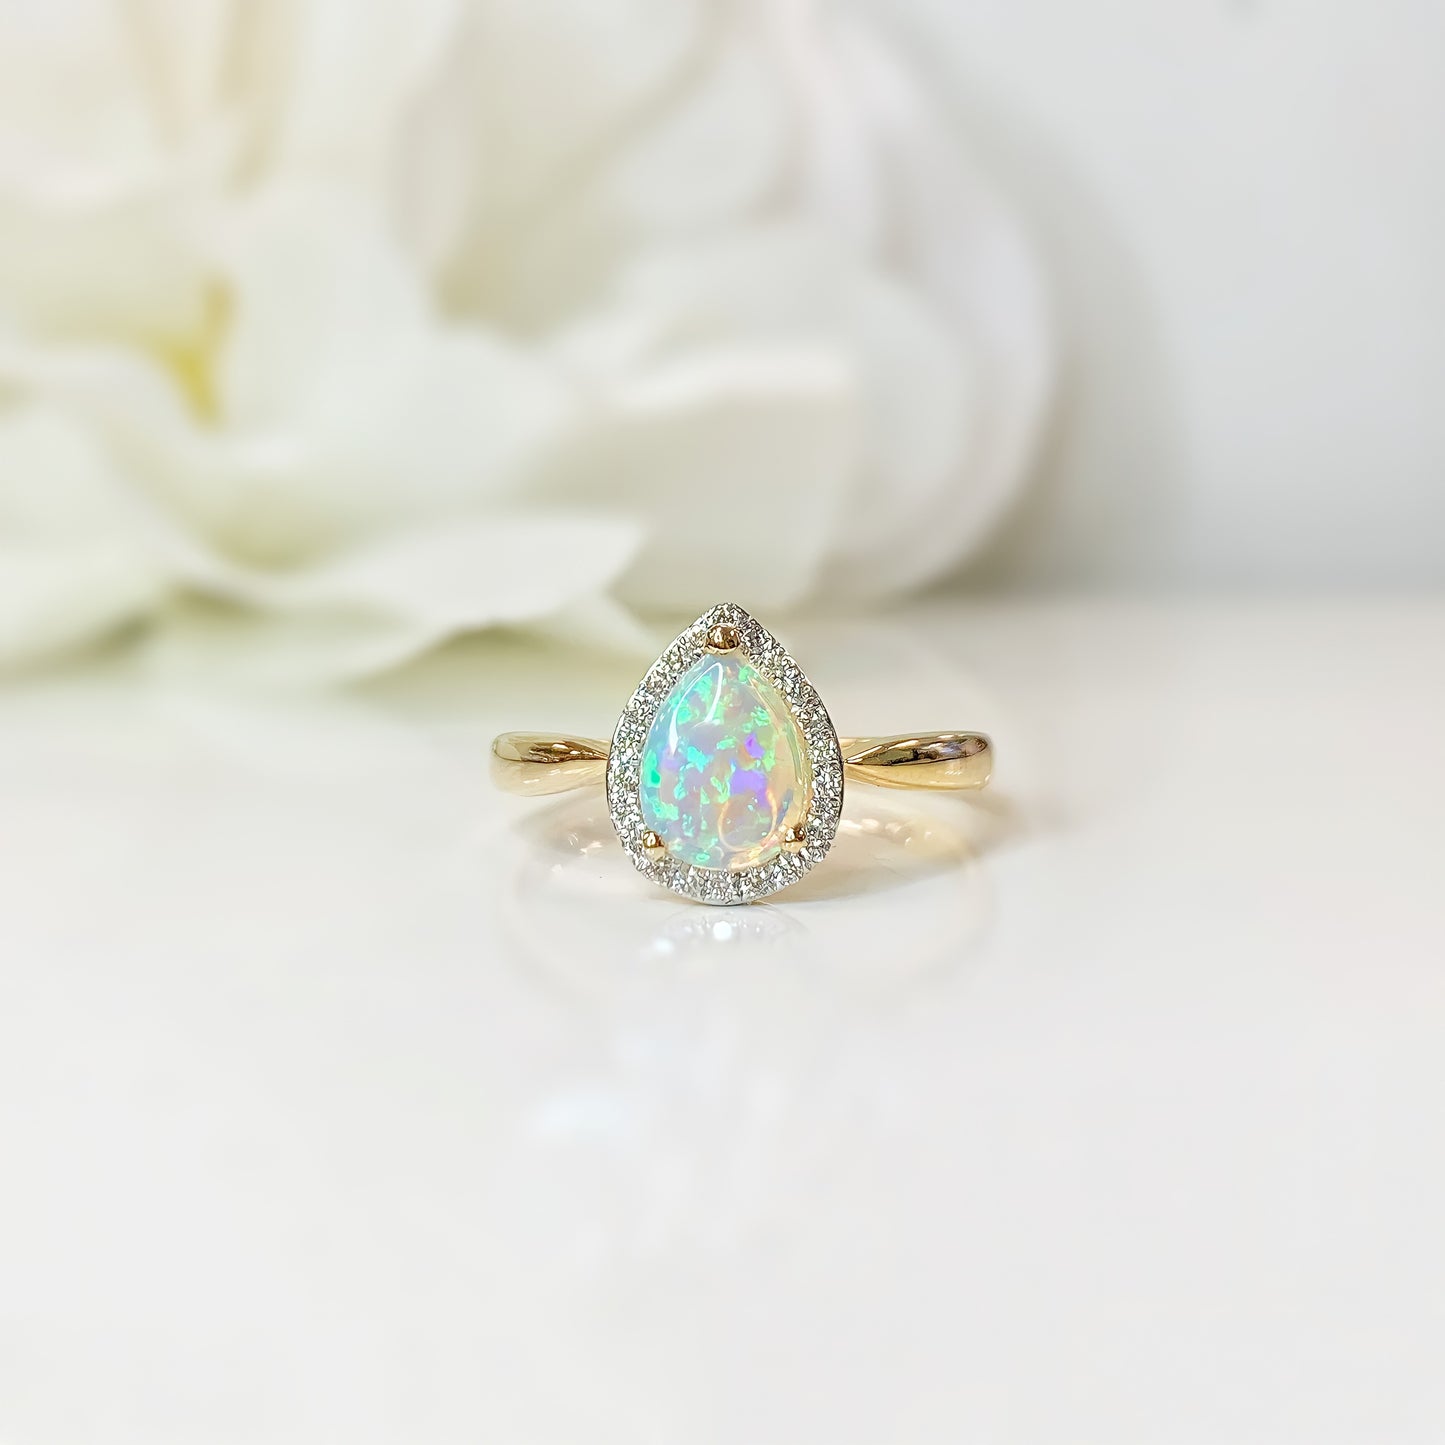 PRE-ORDER 9ct Yellow Gold Opal and Diamond Pear Shaped Halo Ring - Size O